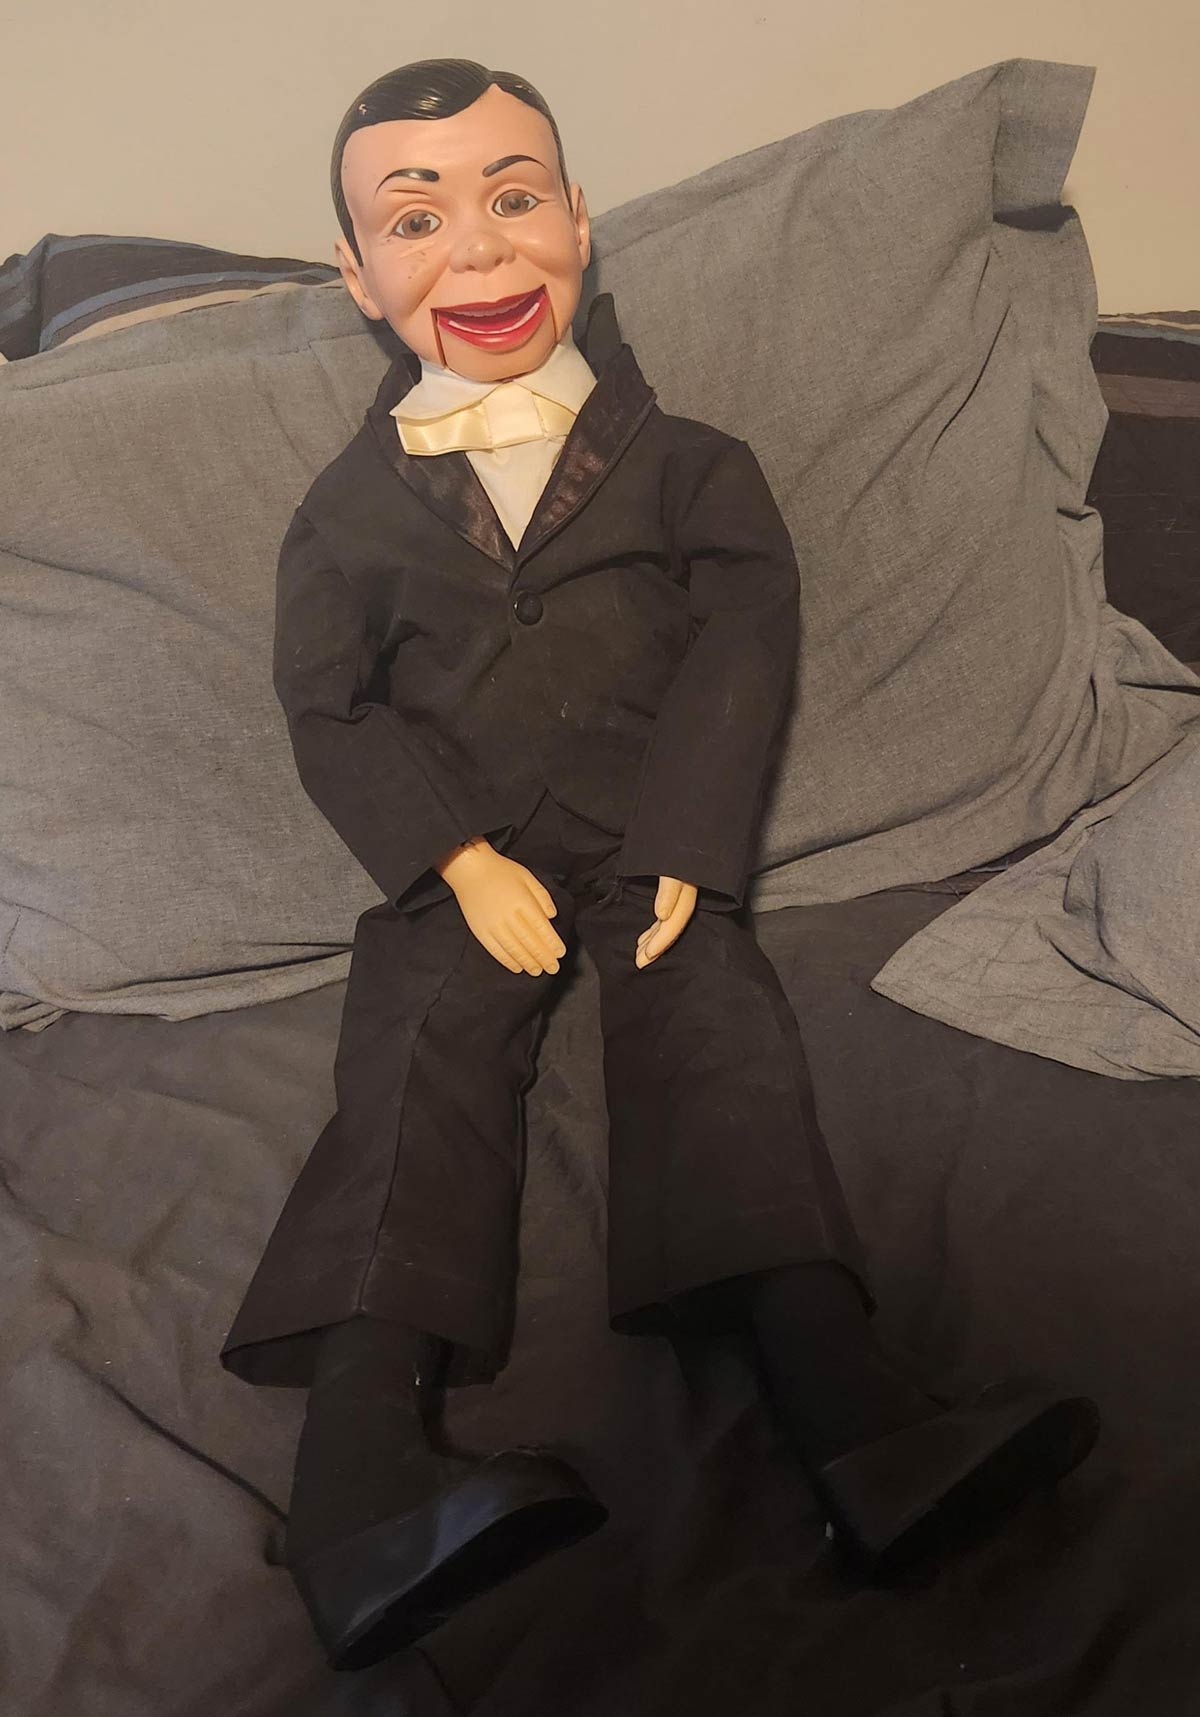 This dummy sat in my grandmother's living room throughout my whole childhood and it always terrified me. Now I have kids, time to pass on the trauma